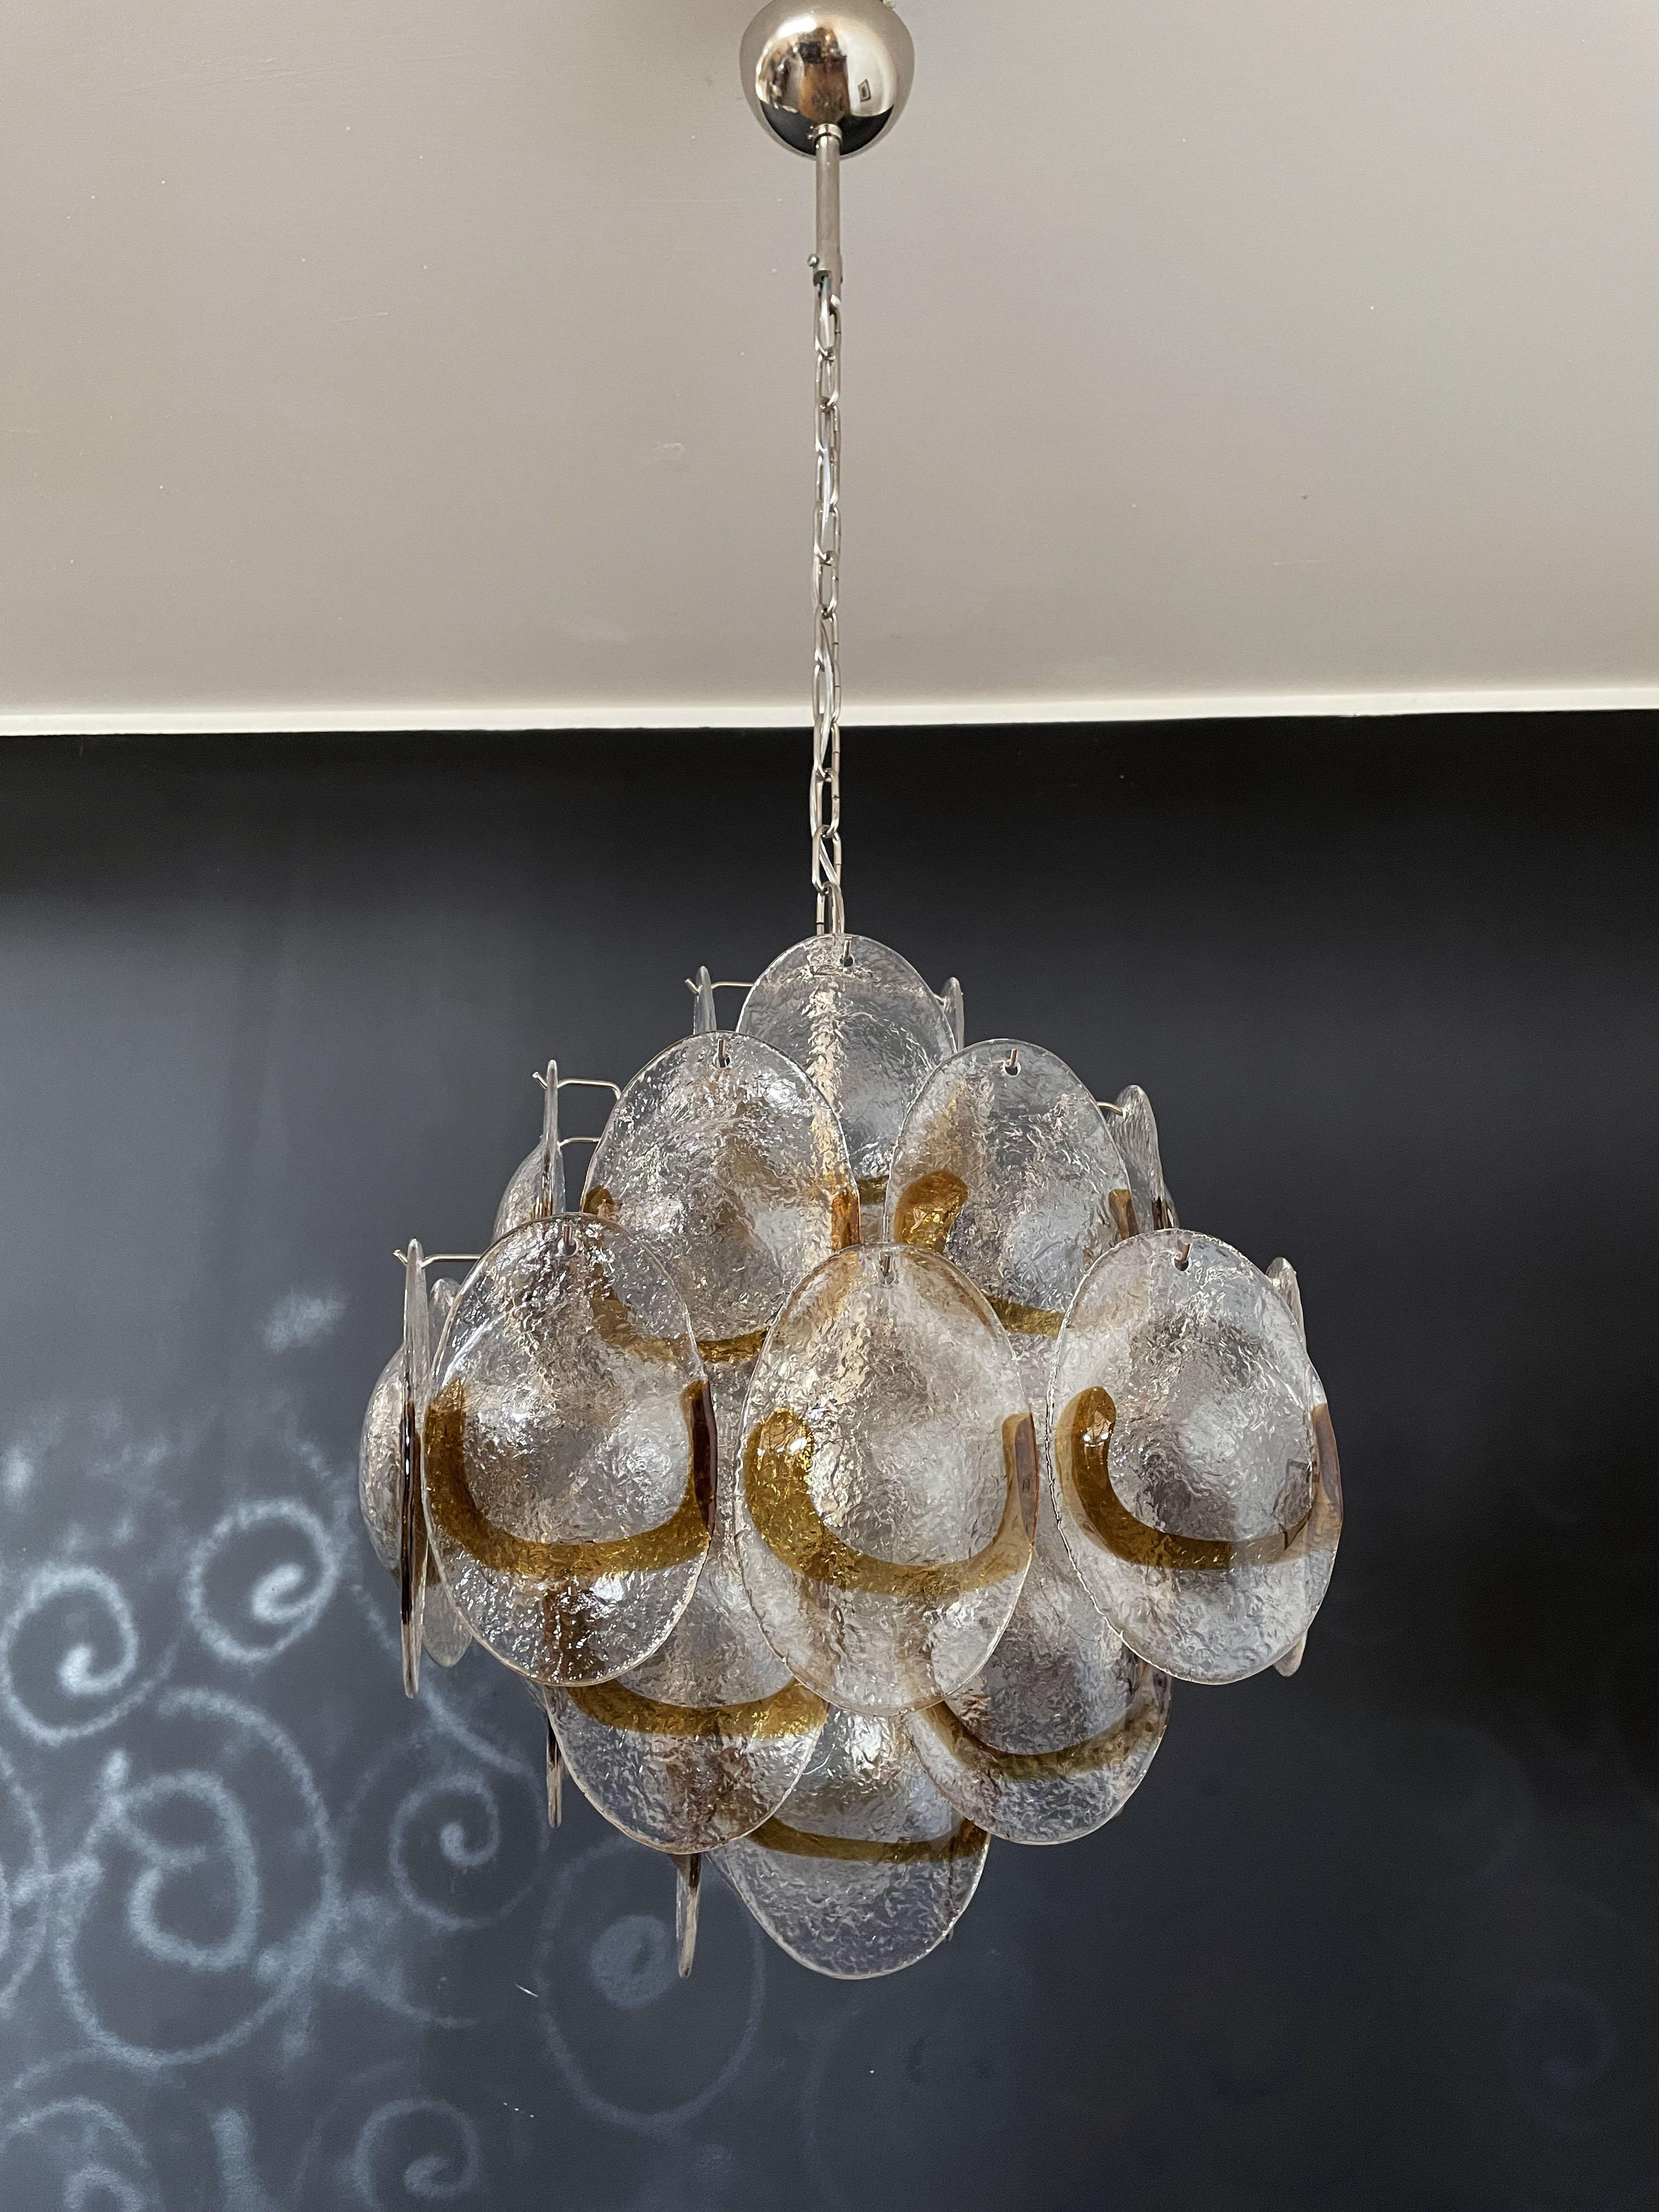 Vintage Italian Murano chandelier in Vistosi style. The chandelier has 36 fantastic trasparent and amber glasses 